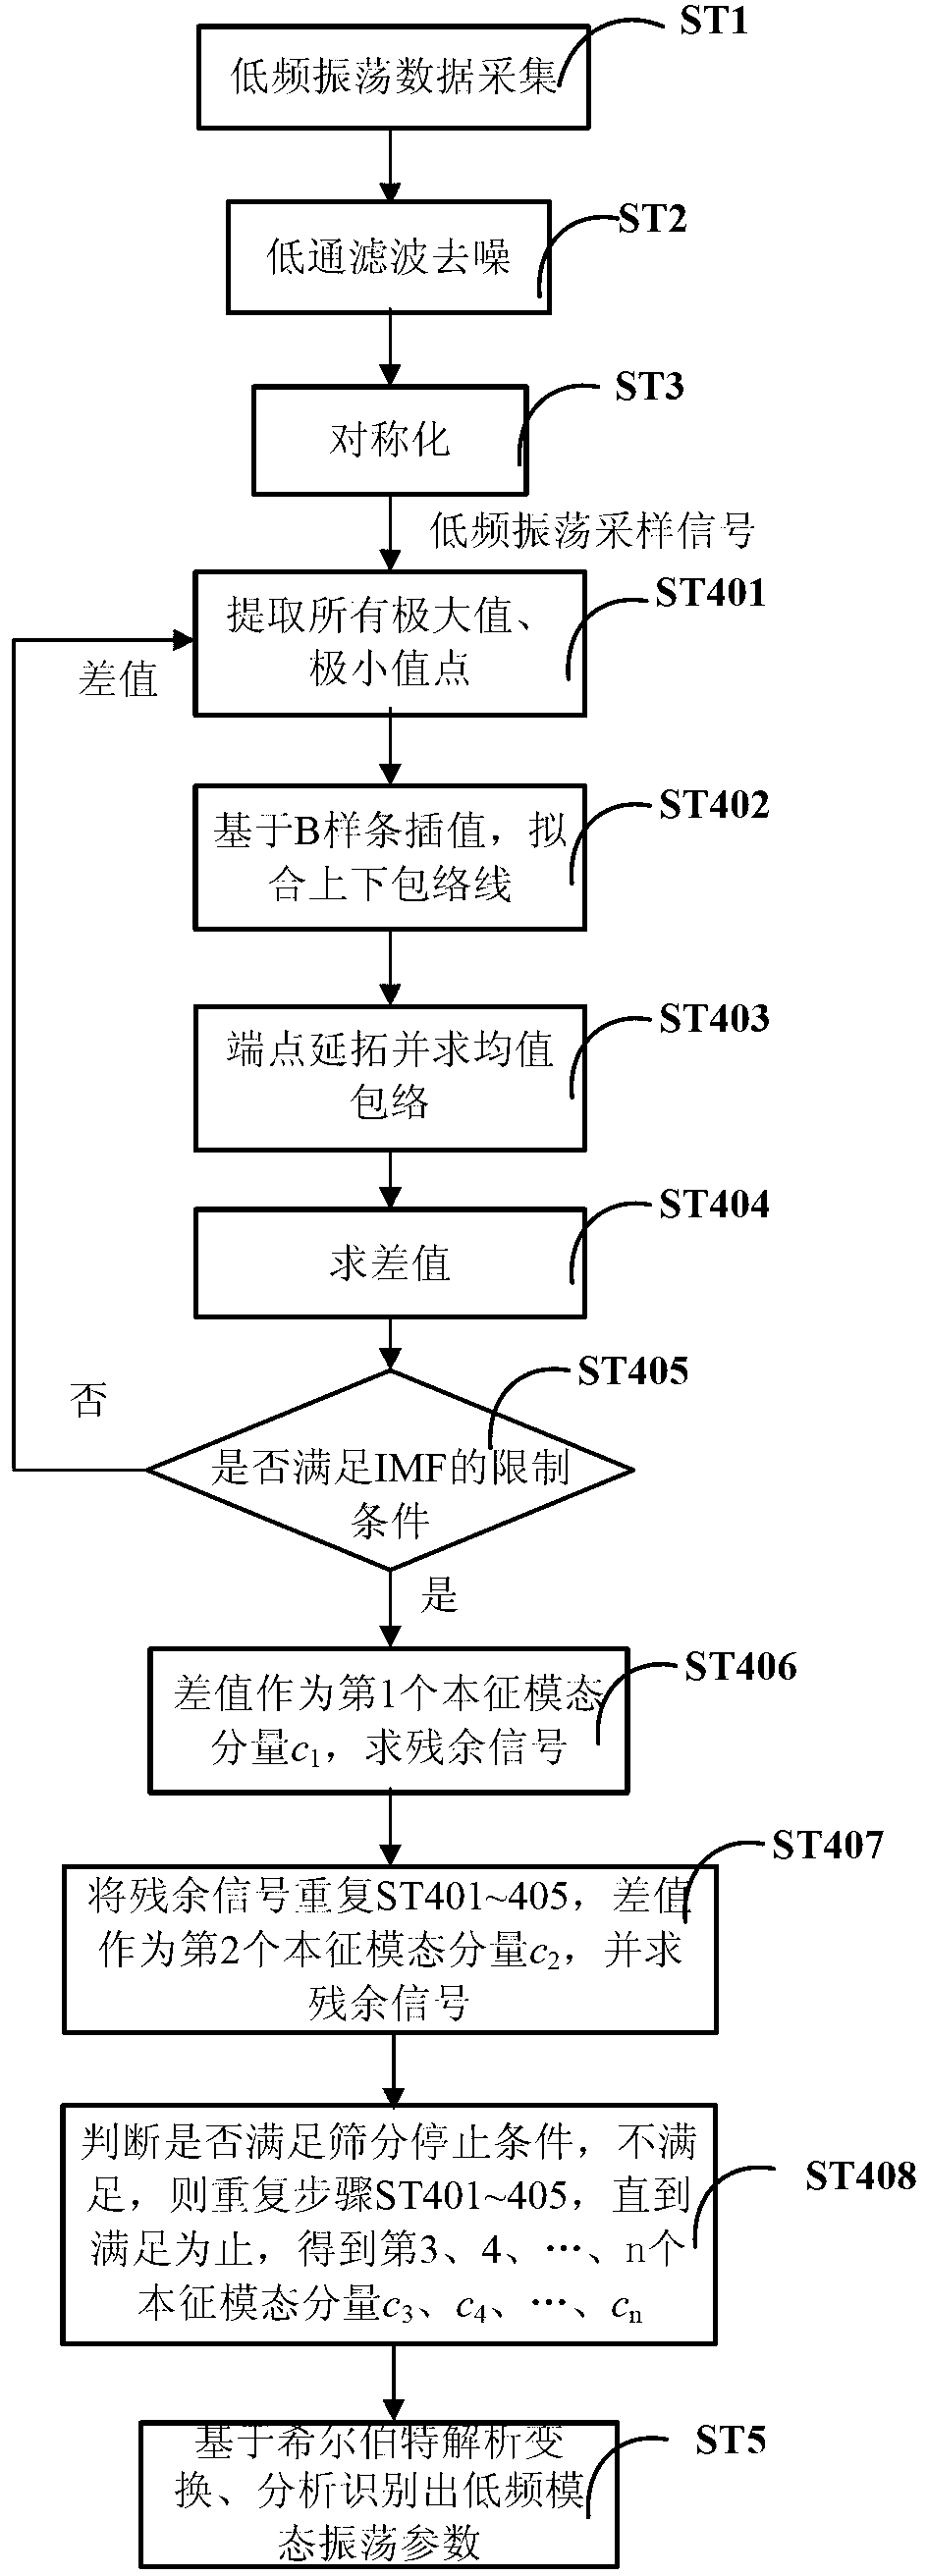 Electric system low-frequency oscillation detection method